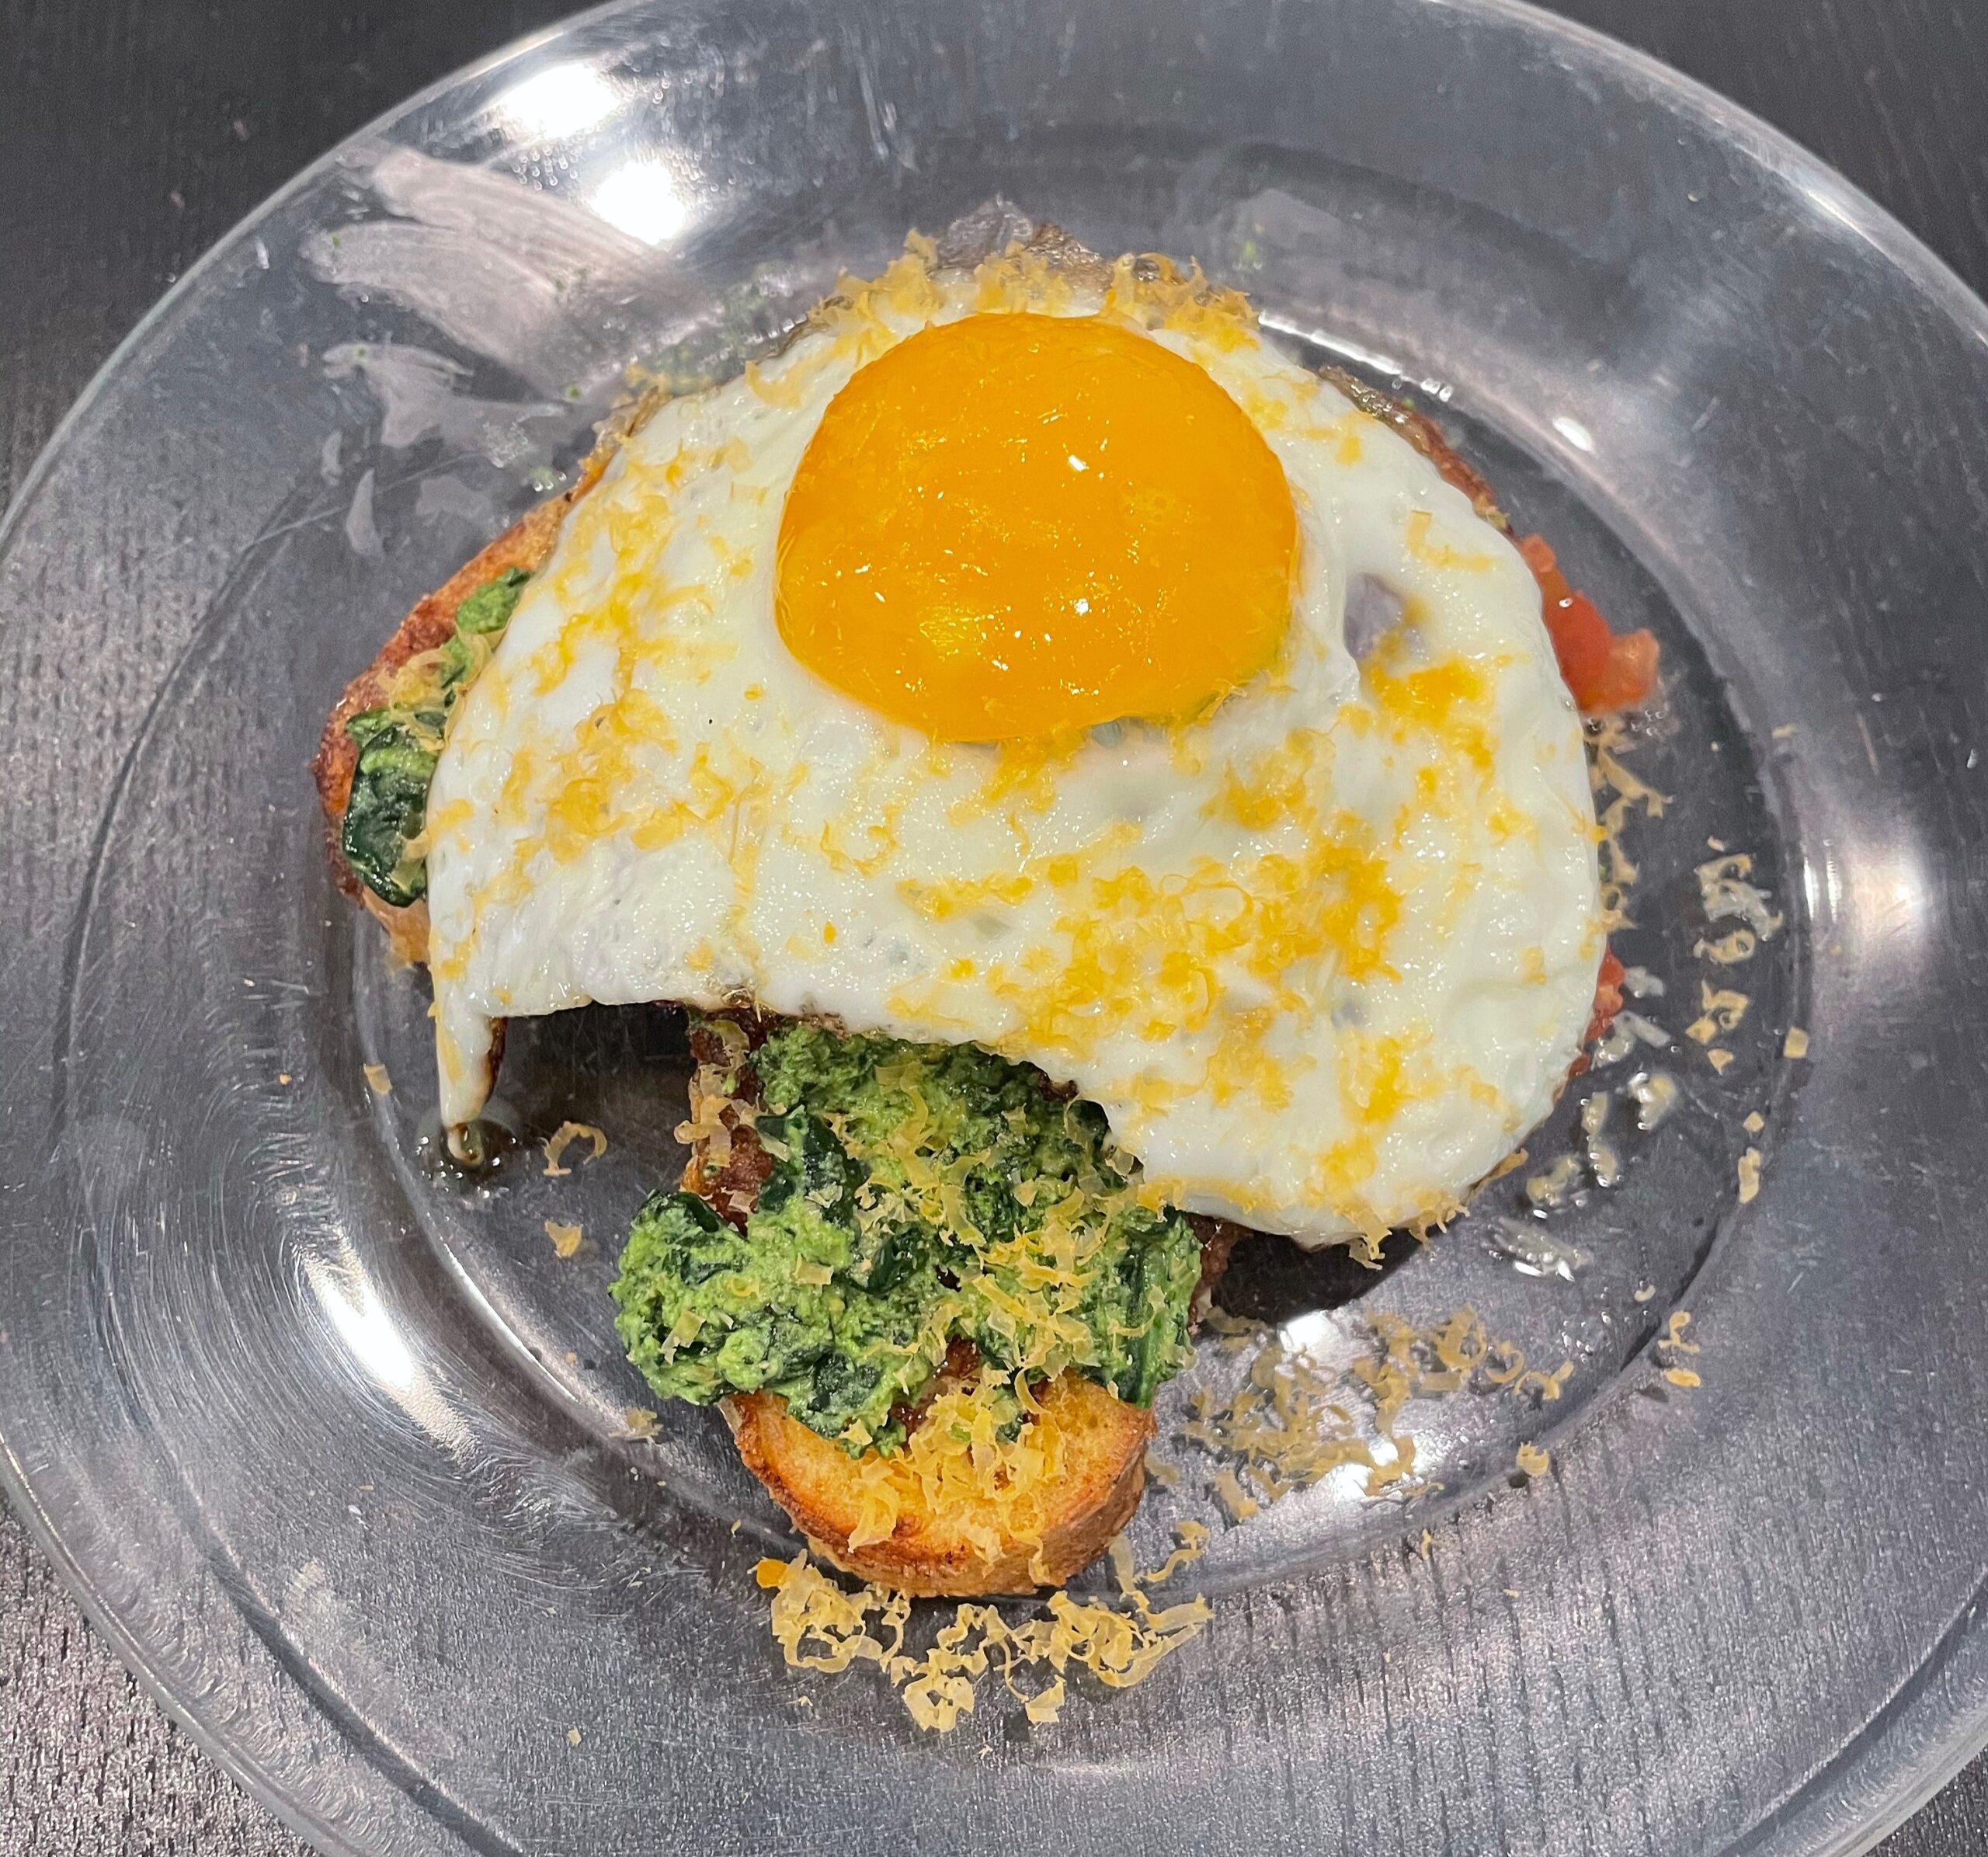 Sunnyside up egg with mimolette cheese made with ingredients from the Too Good To Go App